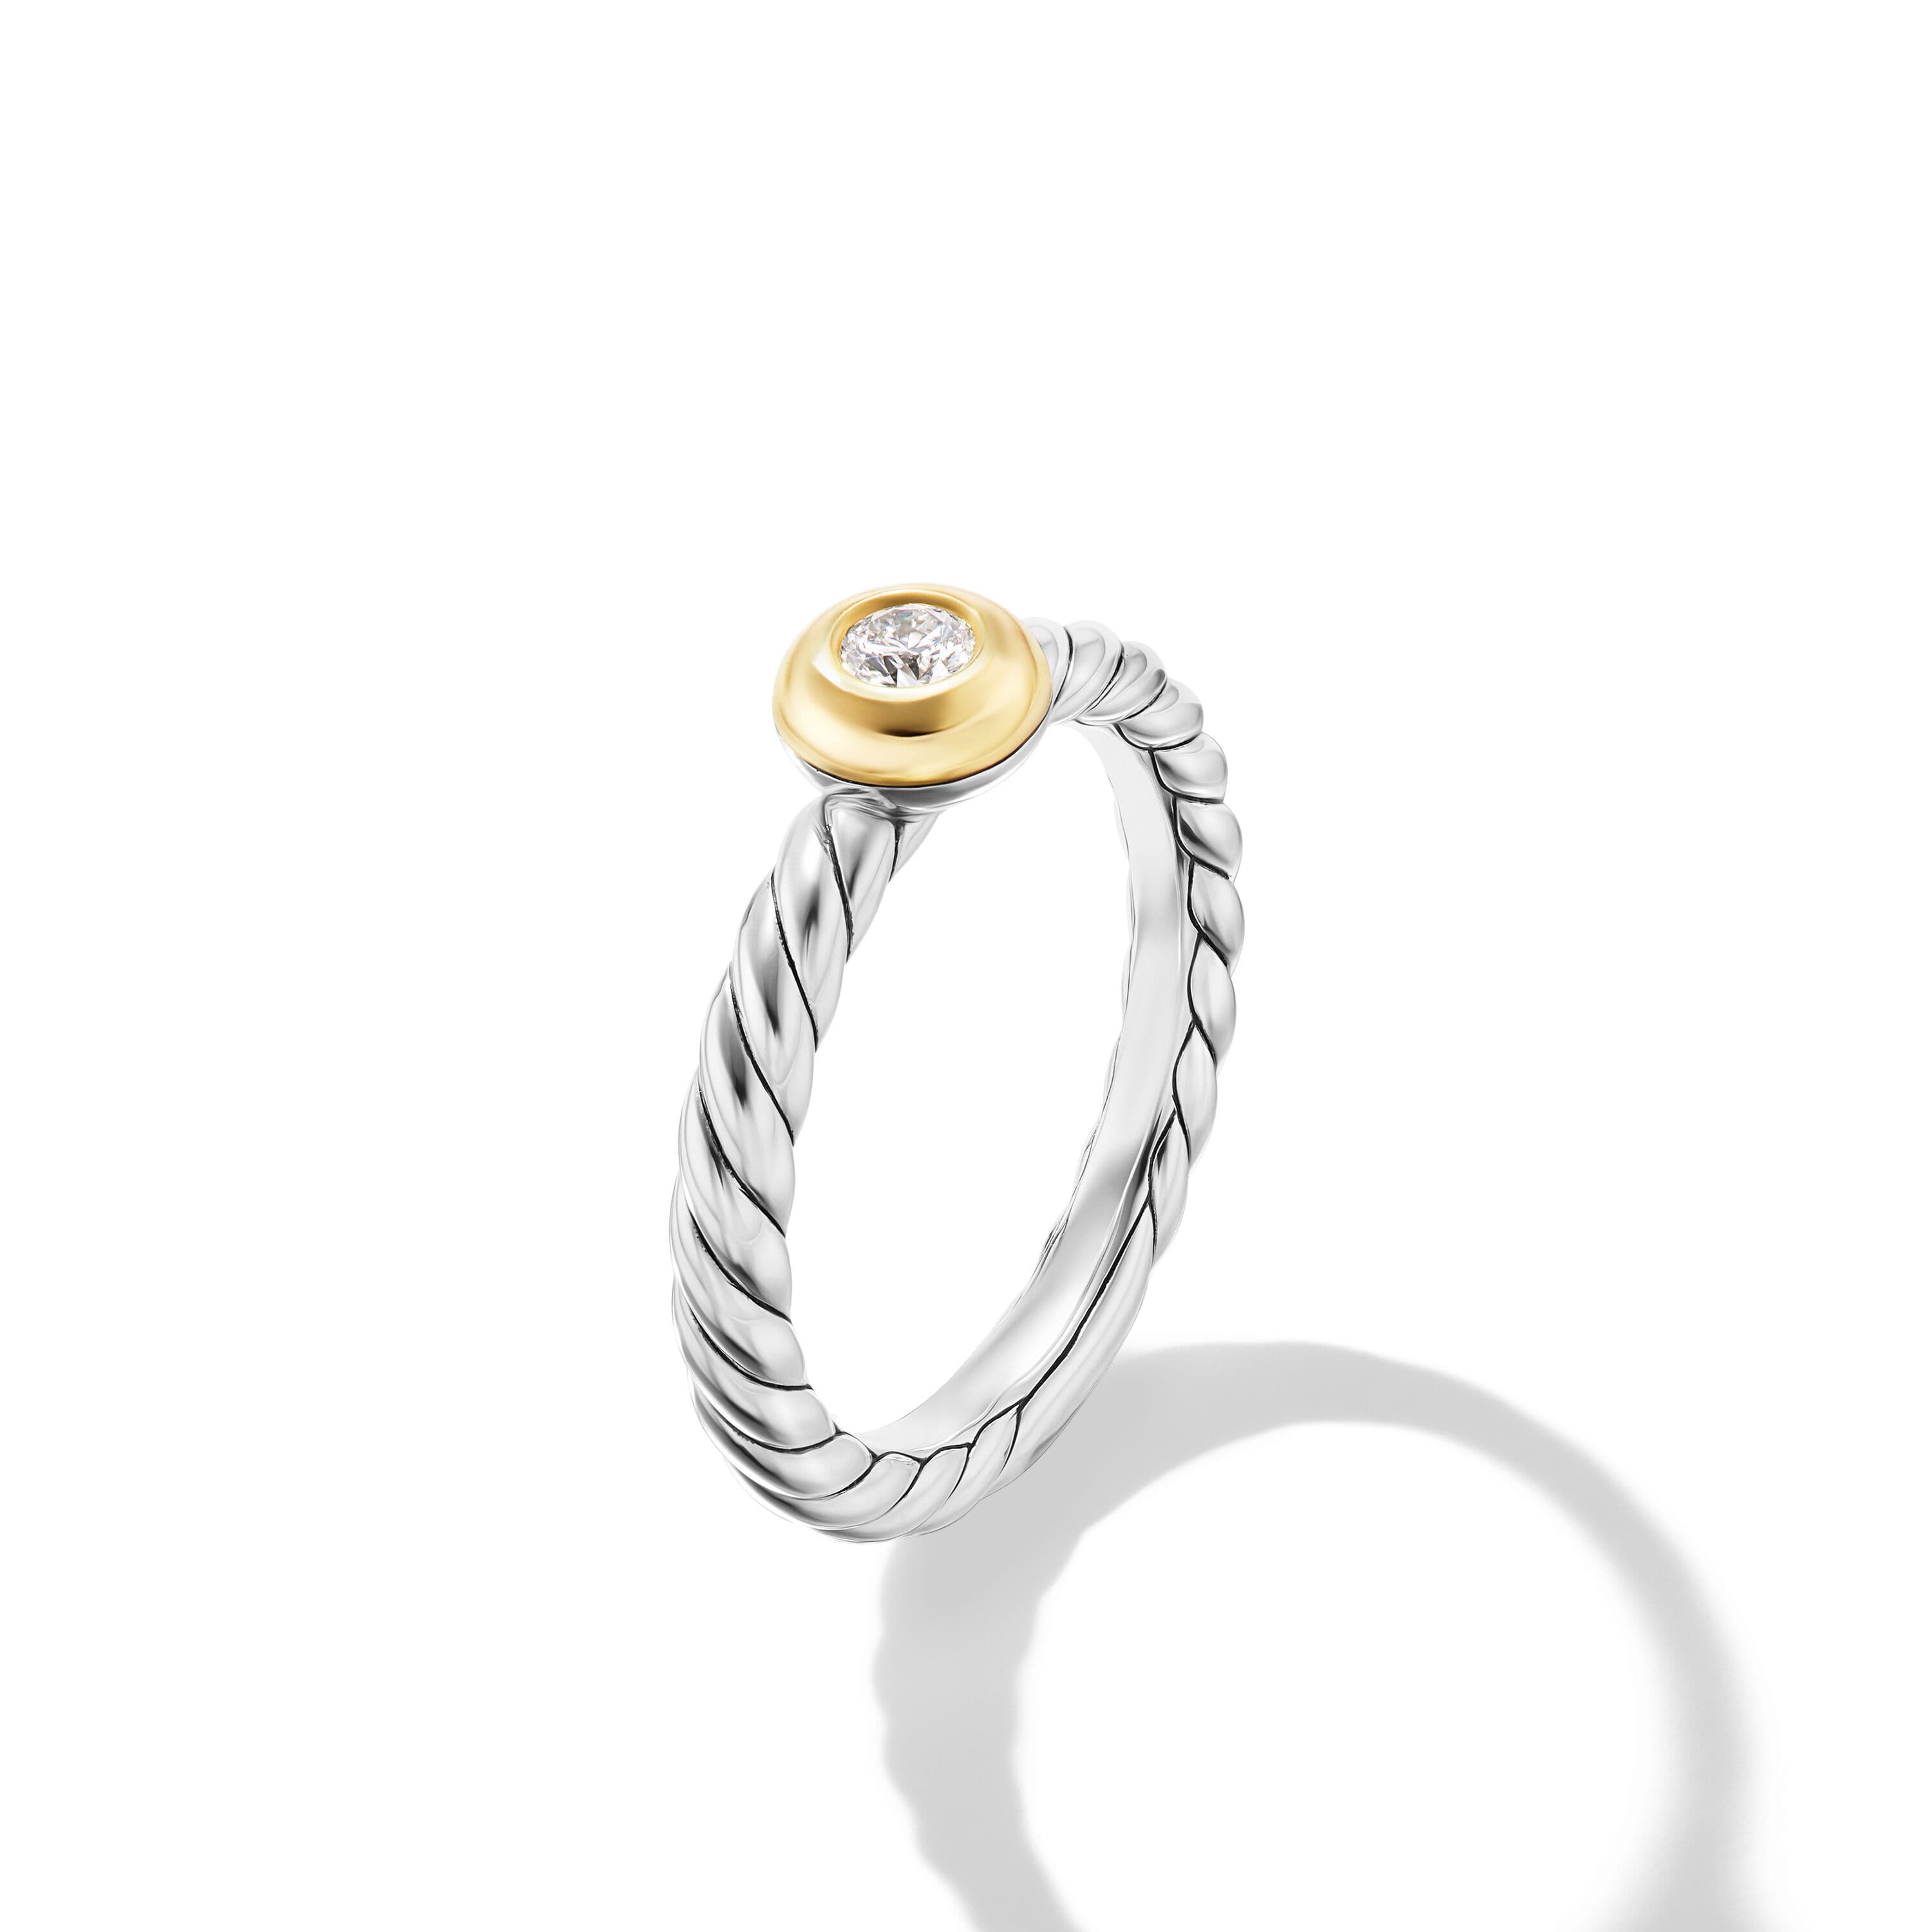 David Yurman Petite Cable Ring in Sterling Silver with 14K Yellow Gold and Diamond, Size 7 1